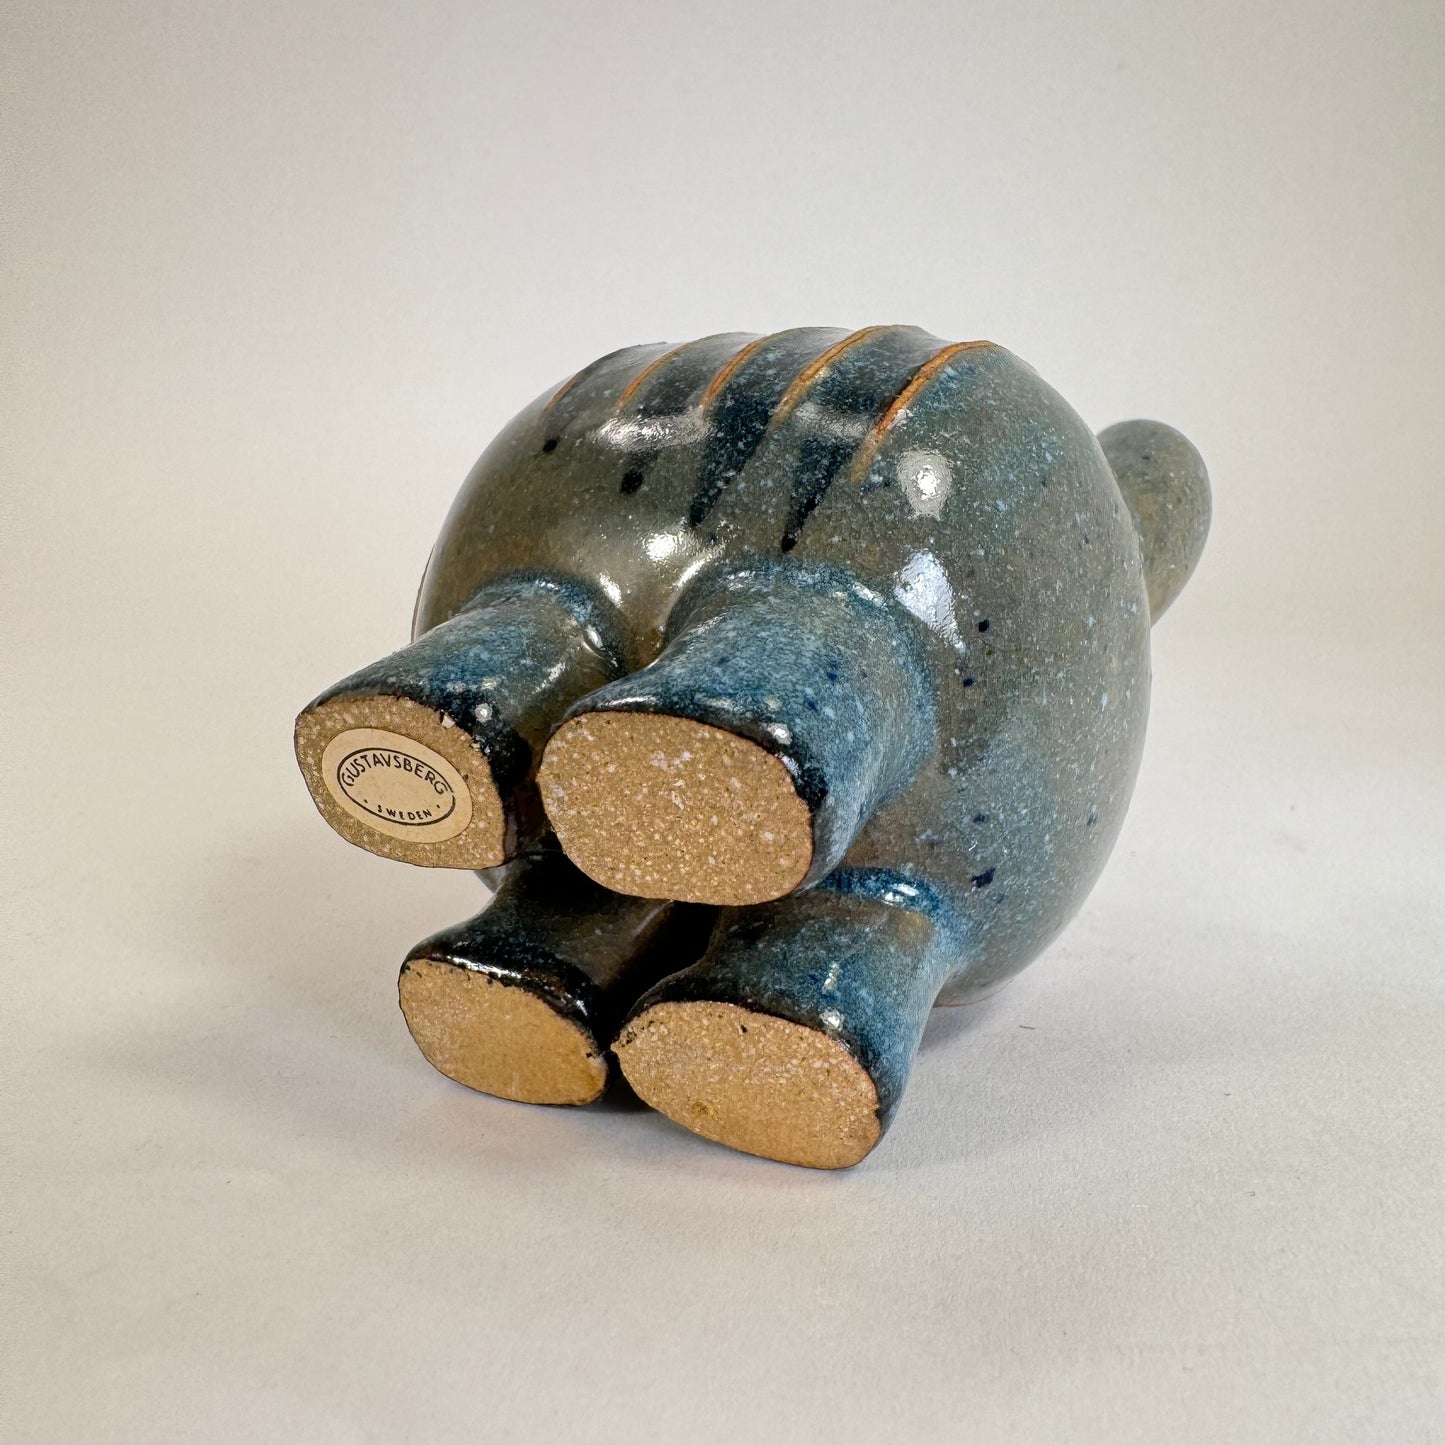 Stoneware cat from the series ”menageri” by Lisa Larson